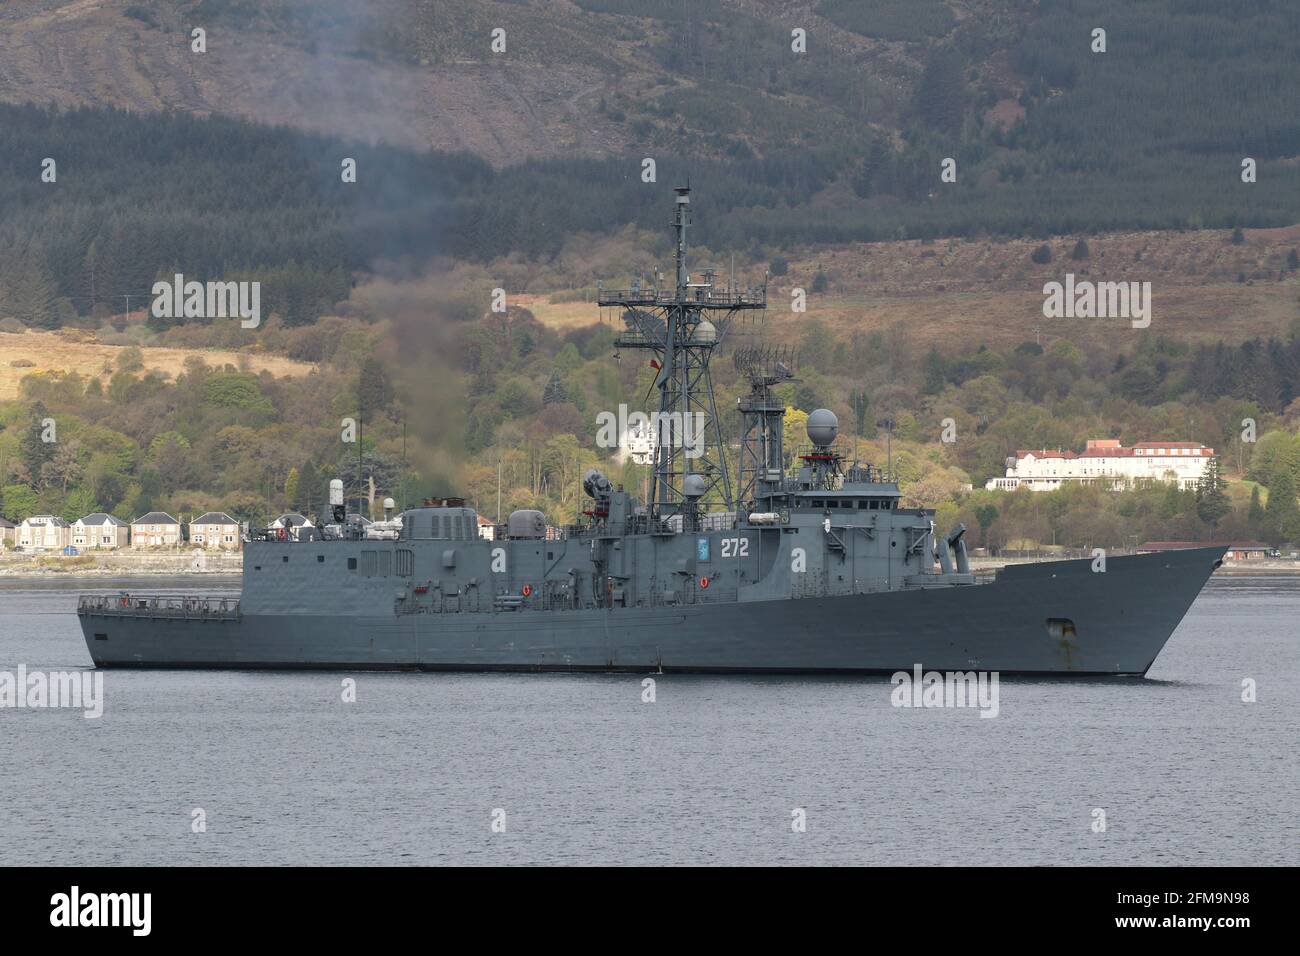 ORP Generał Kazimierz Pułaski, an Oliver Hazard Perry-class guided missile frigate operated by the Polish Navy, passes Gourock on her arrival for Exercise Joint Warrior 21-1. This particular vessel previously served in the United States Navy as USS Clark (FFG-11) from 1980 to 2000, when she was transferred to the Polish Navy. Stock Photo